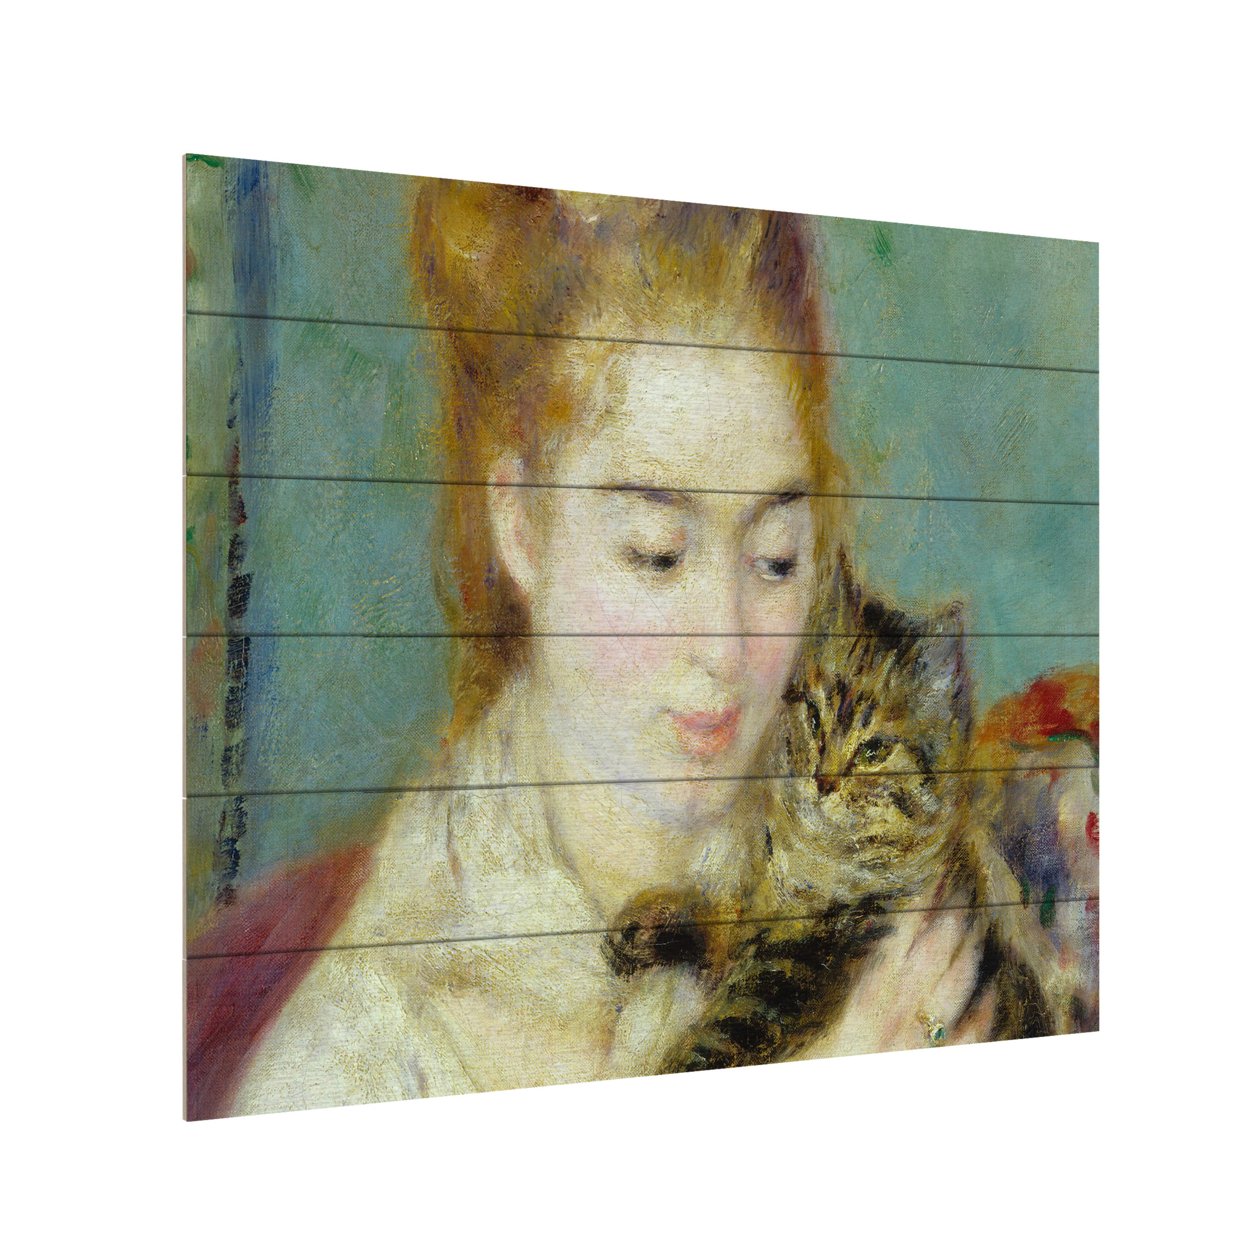 Wooden Slat Art 18 X 22 Inches Titled Woman With A Cat 1875 Ready To Hang Home Decor Picture